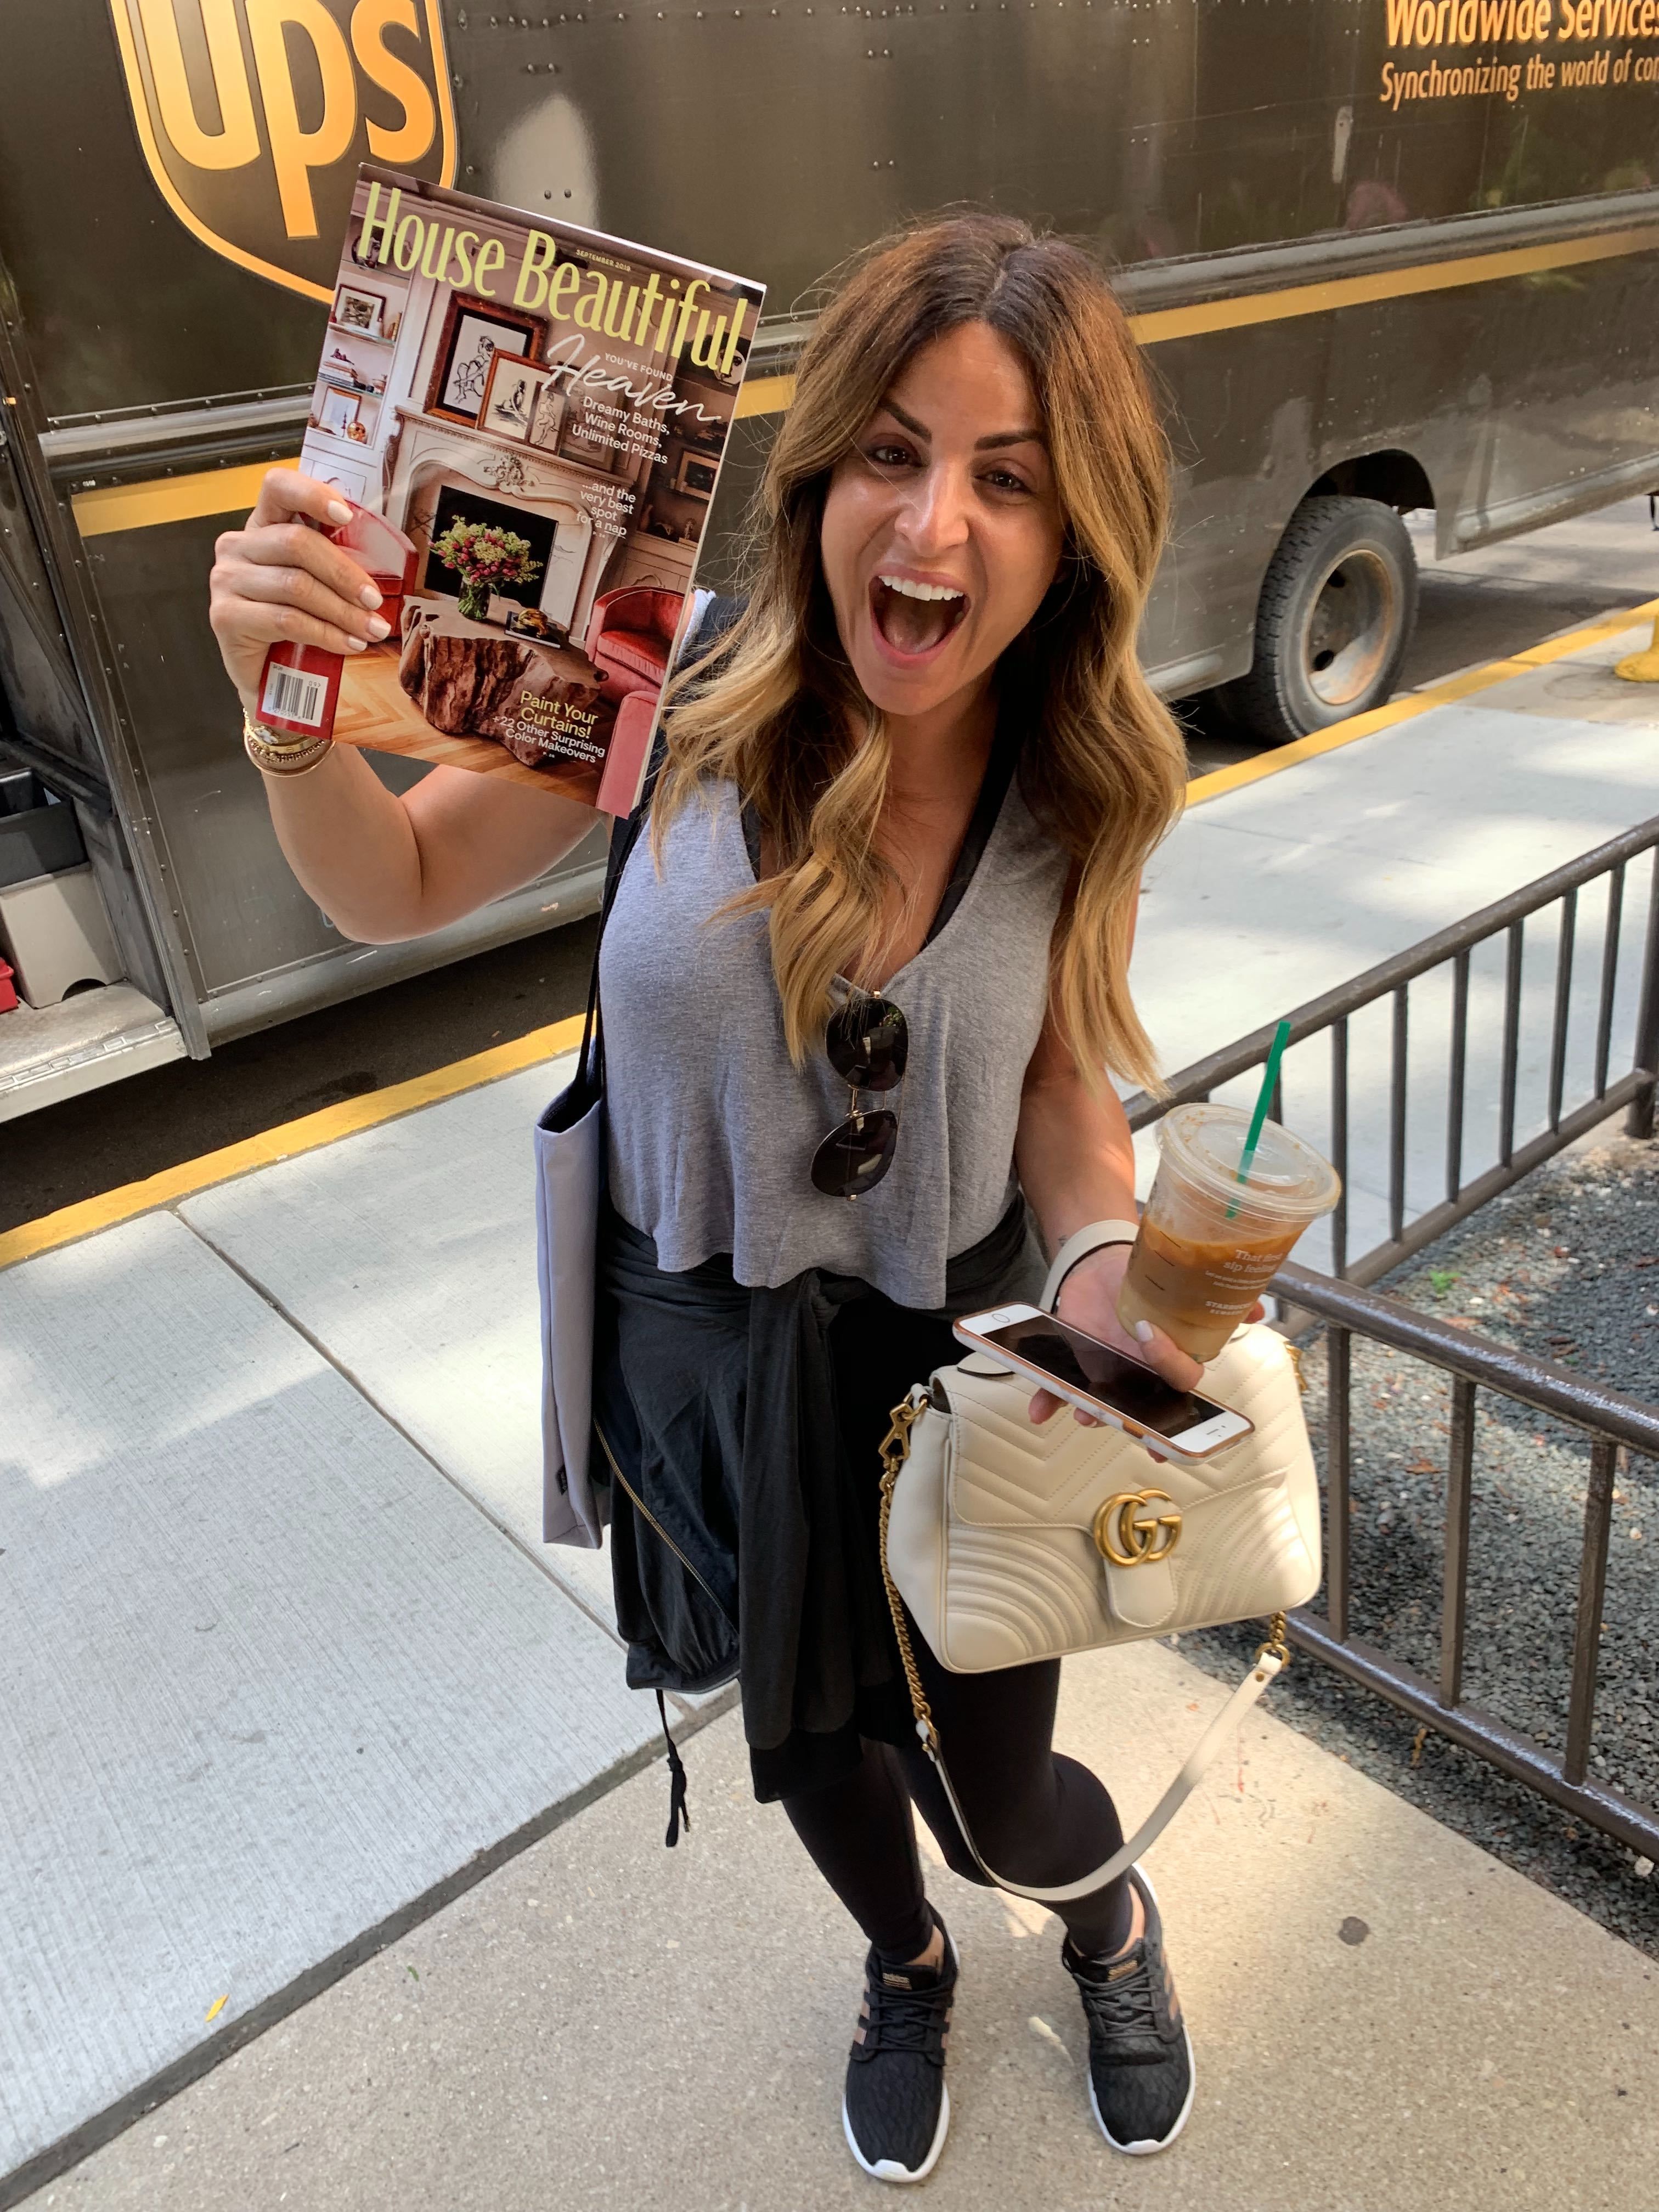 HGTV Star Alison Victoria Is on House Beautifuls September 2019 Cover image